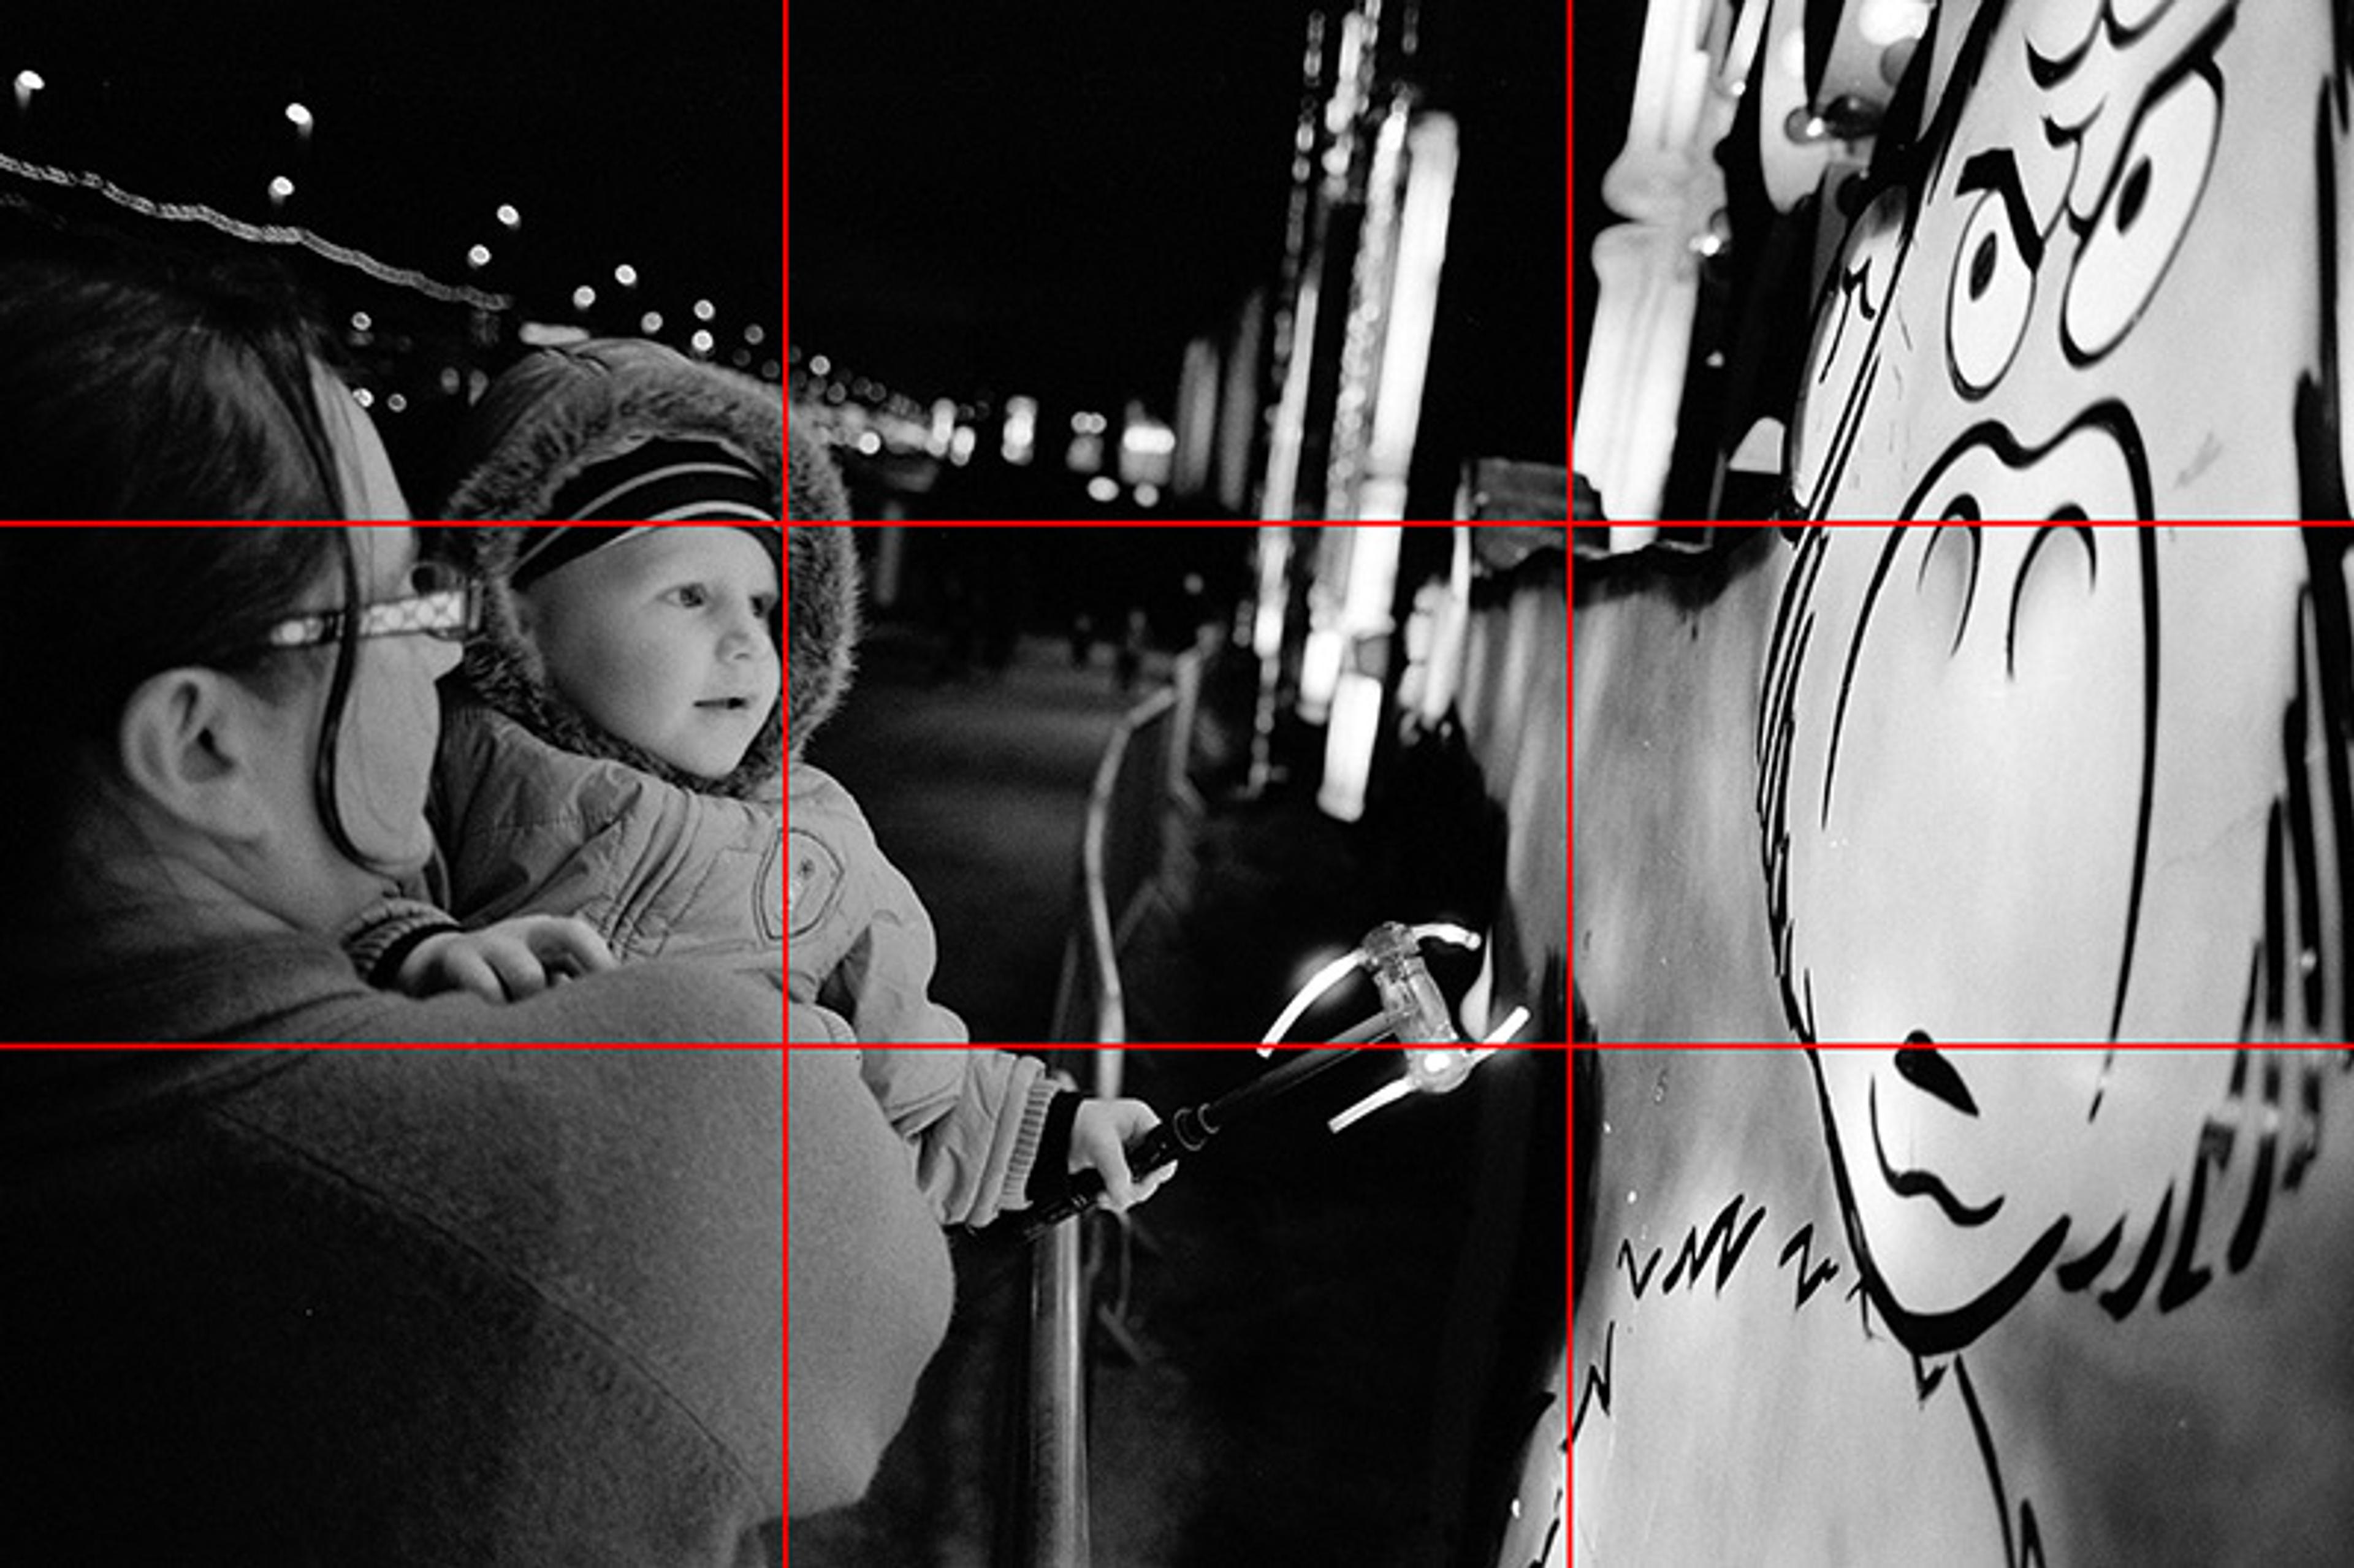 A woman holds a young child who is looking at a cartoon figure on a poster. The image is overlayed with a grid of 9 rectangles dividing the picture into sections